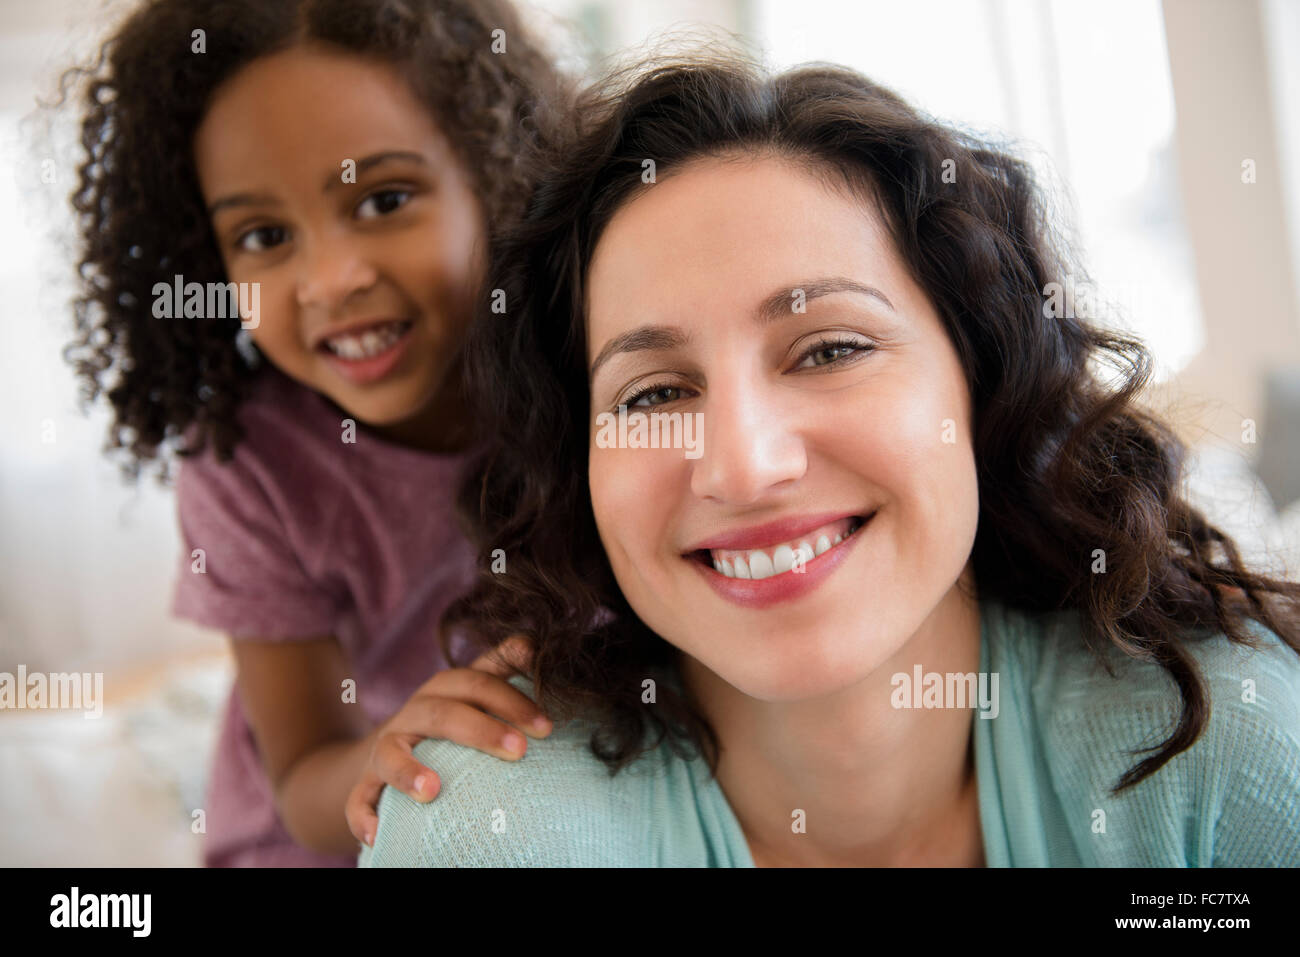 Mother and daughter smiling indoors Stock Photo